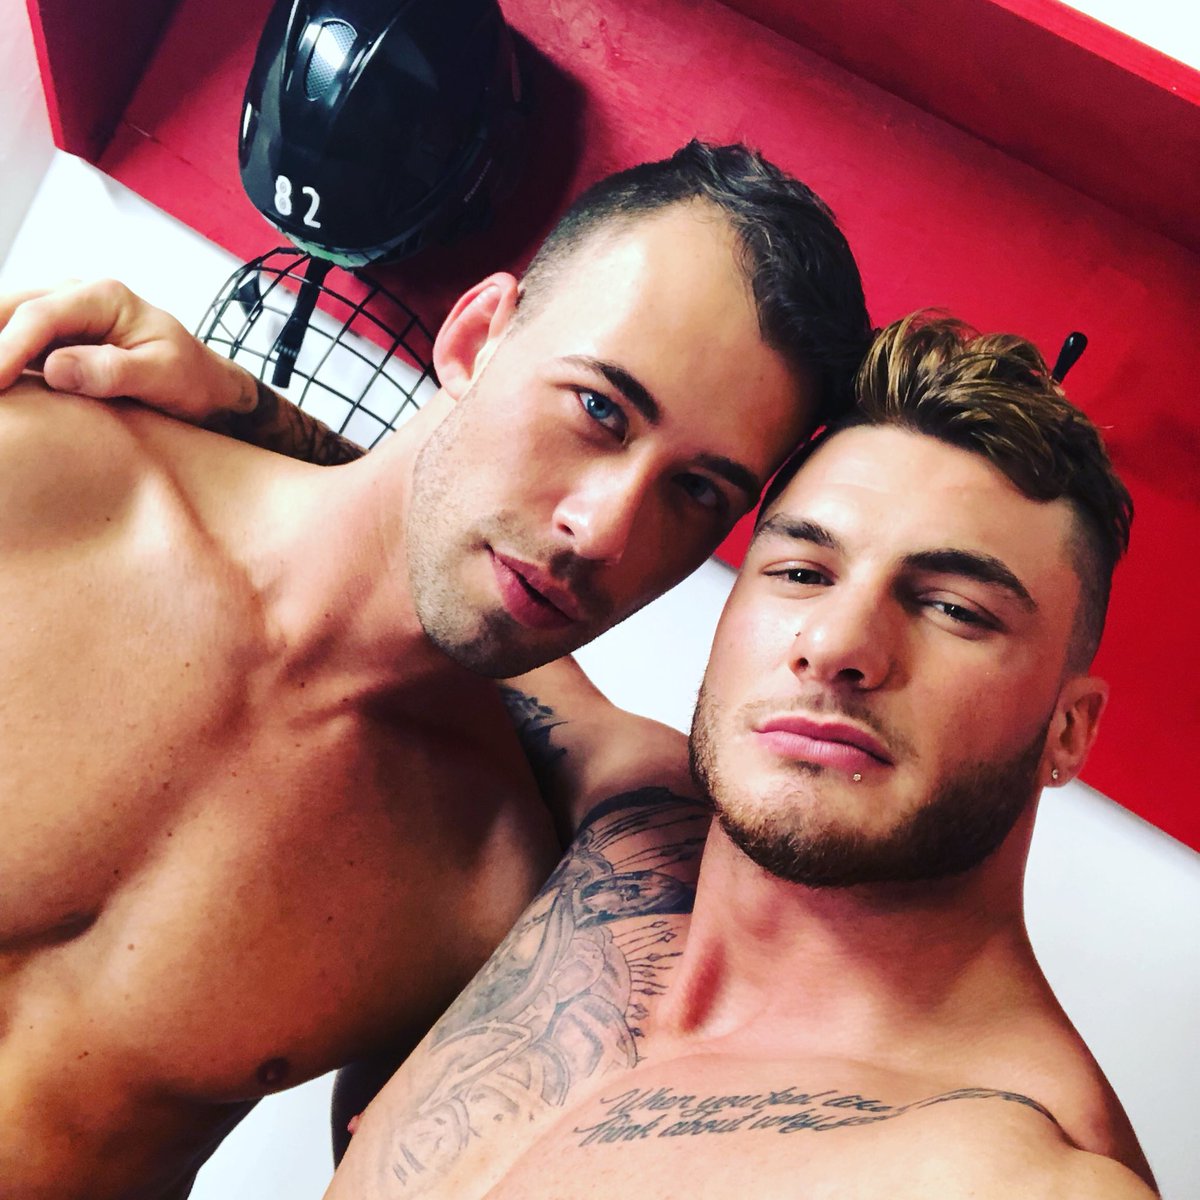 Free onlyfans gay videos